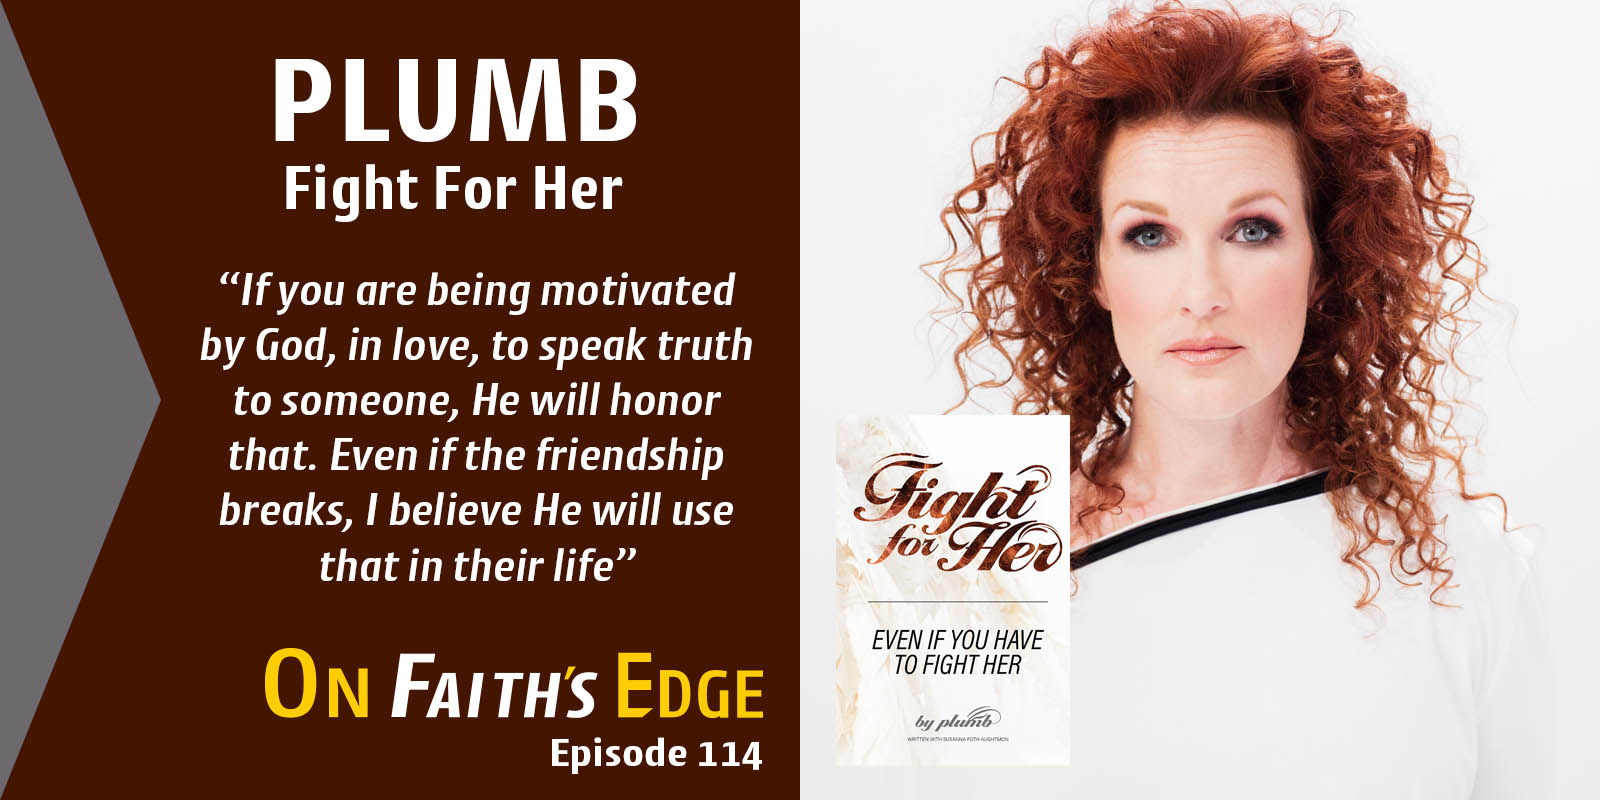 Dove Award-Winner, Author – PLUMB | Fight For Her, Even If You Have To Fight Her!